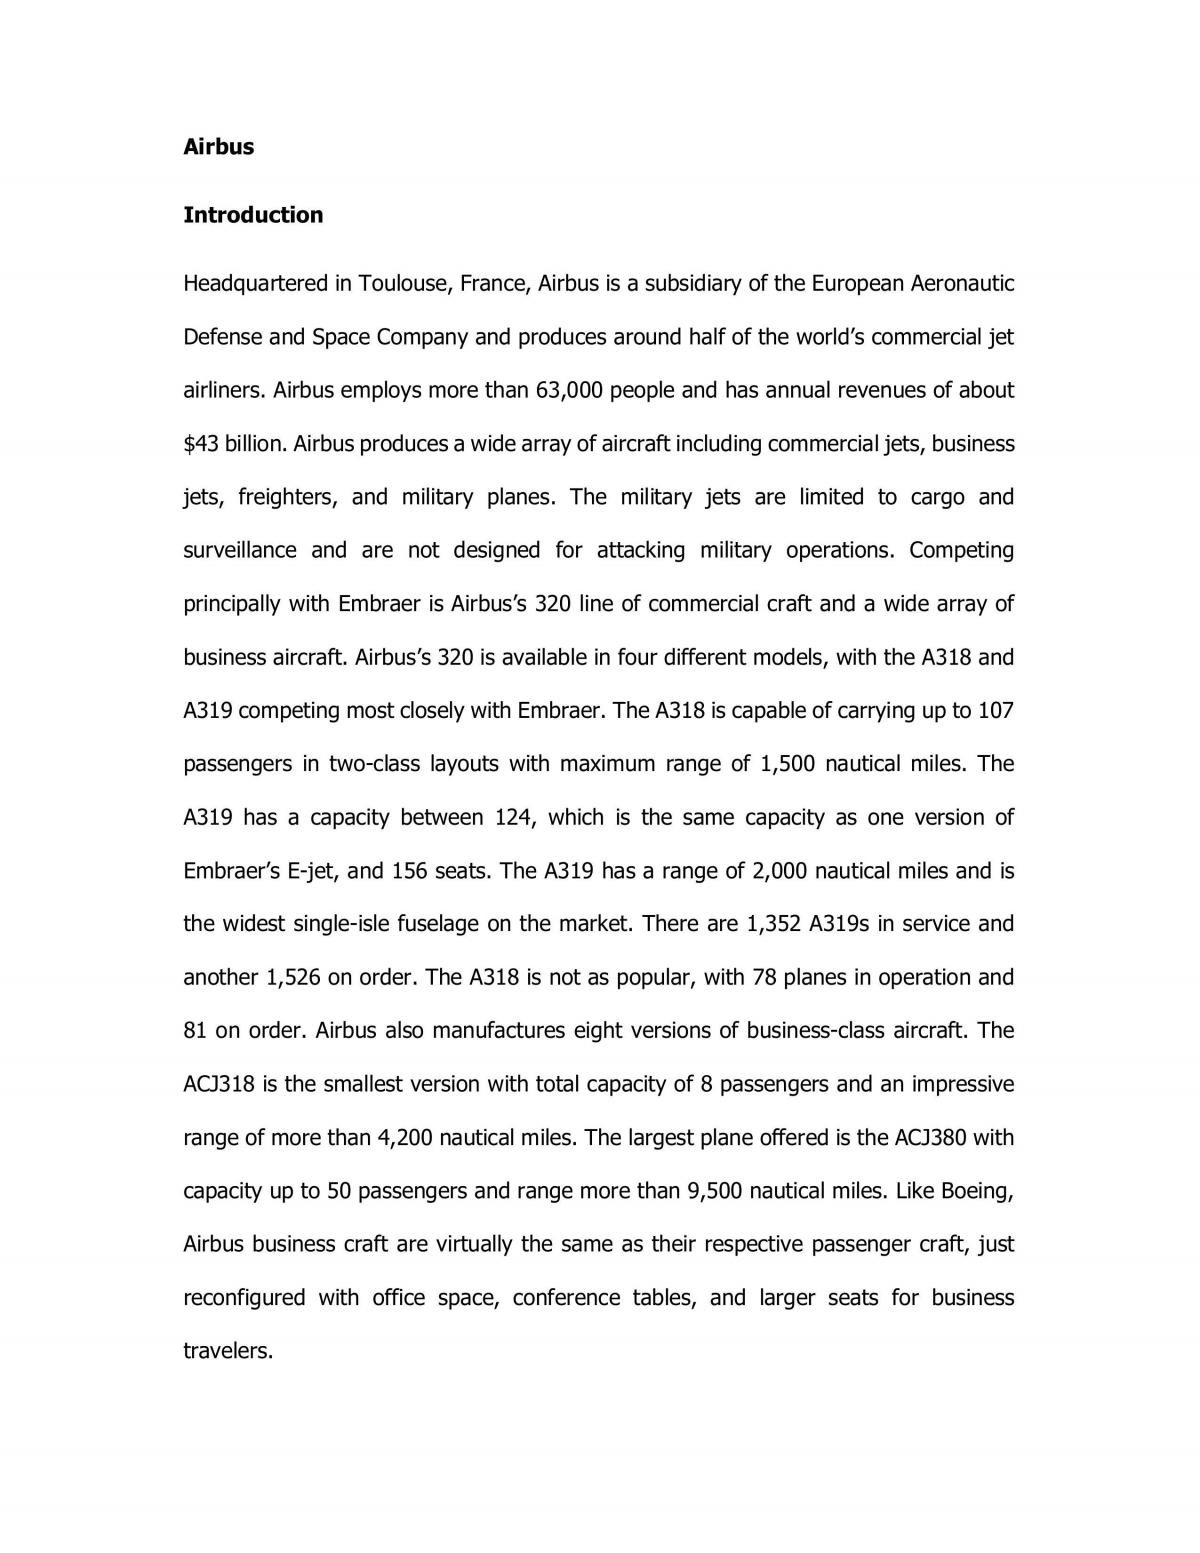 Analysis of AirBus - Page 1